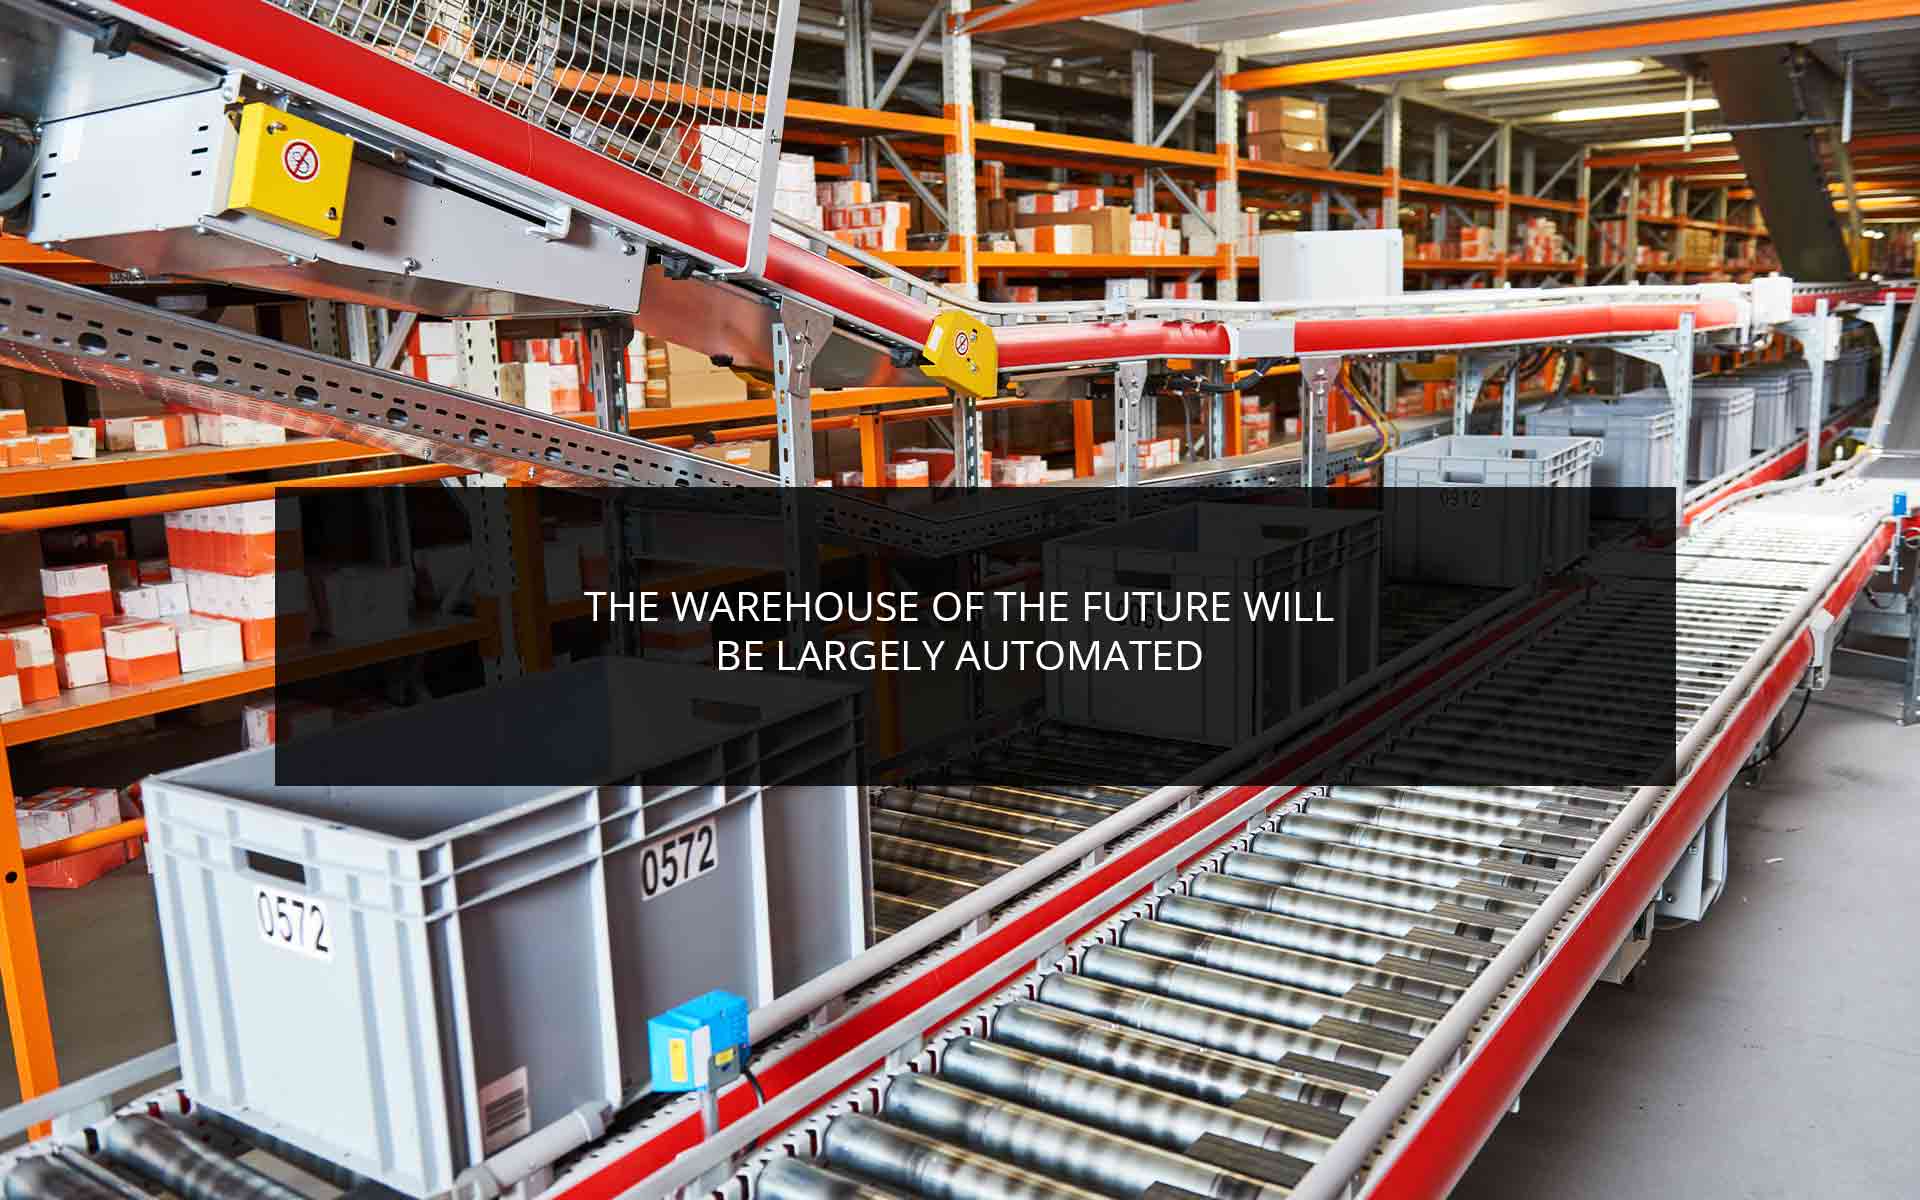 The Warehouse of the Future Will Be Largely Automated